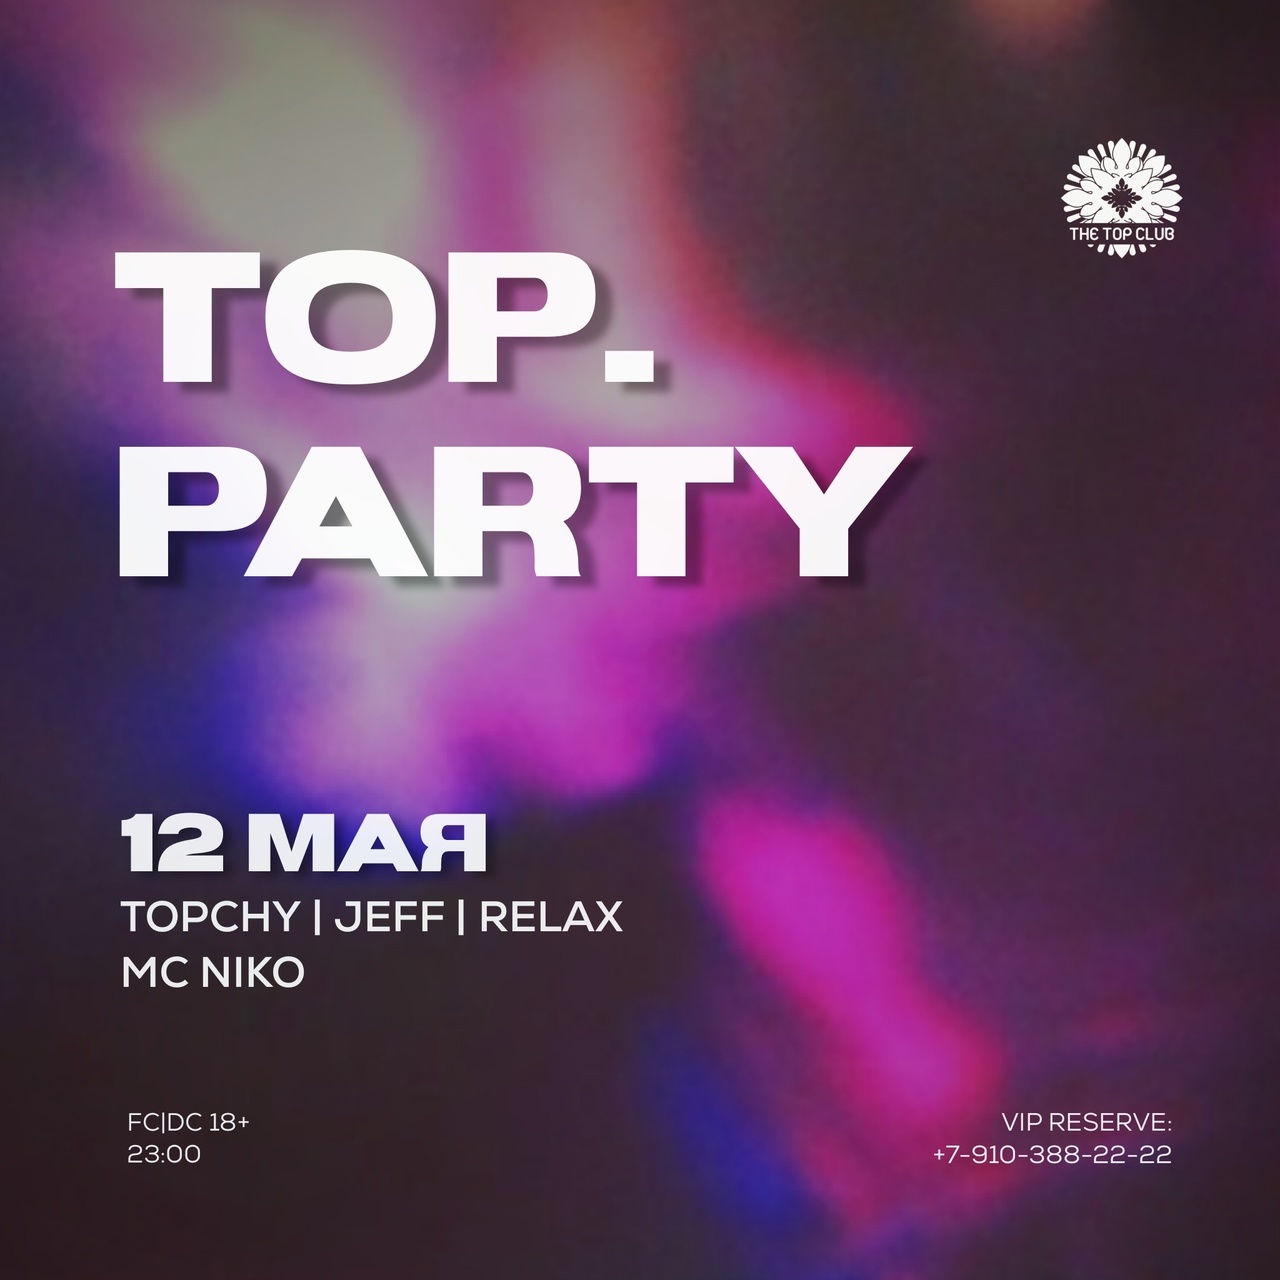 TOP. PARTY